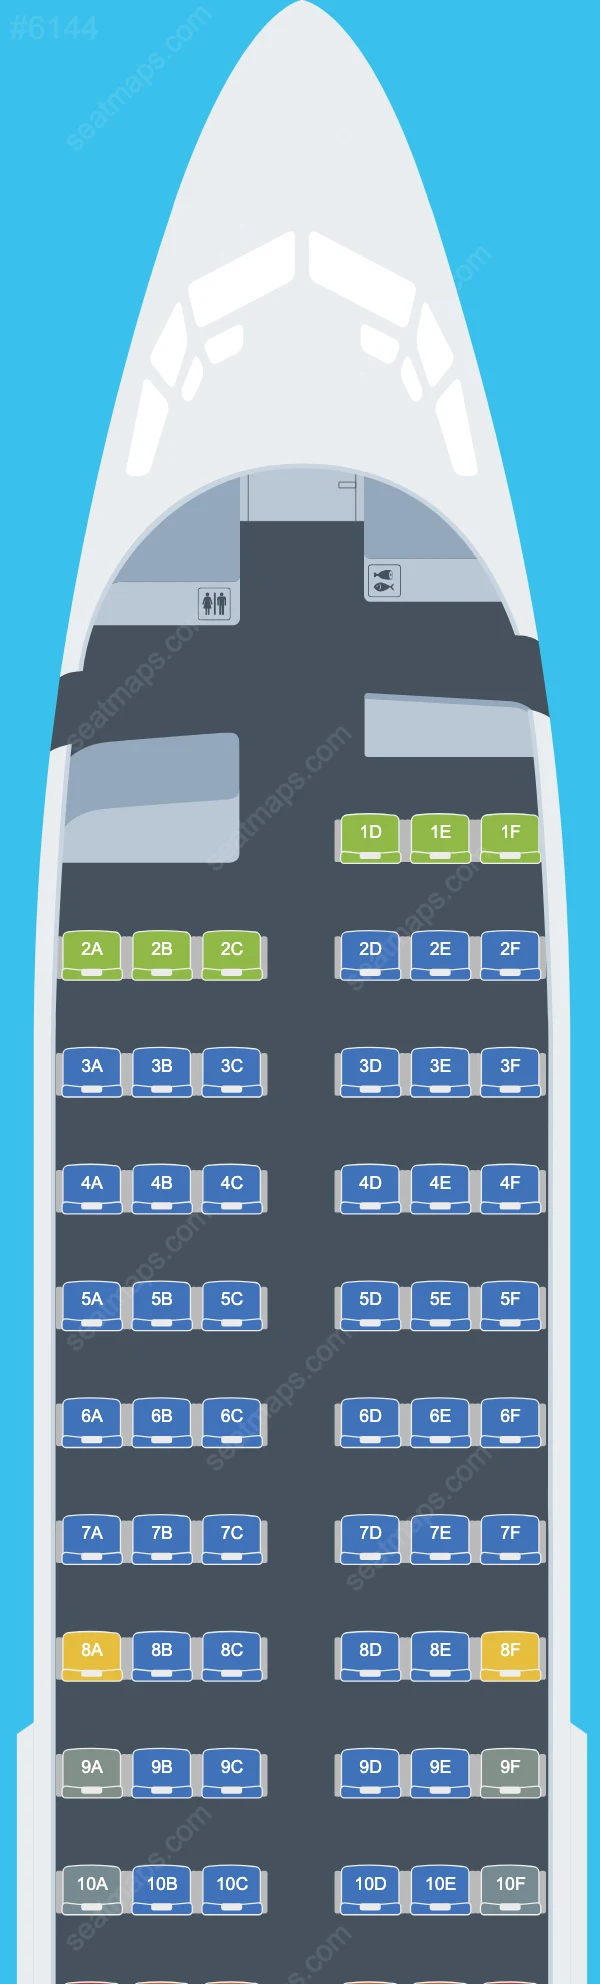 Shandong Airlines Boeing 737 aircraft seat map  737-700